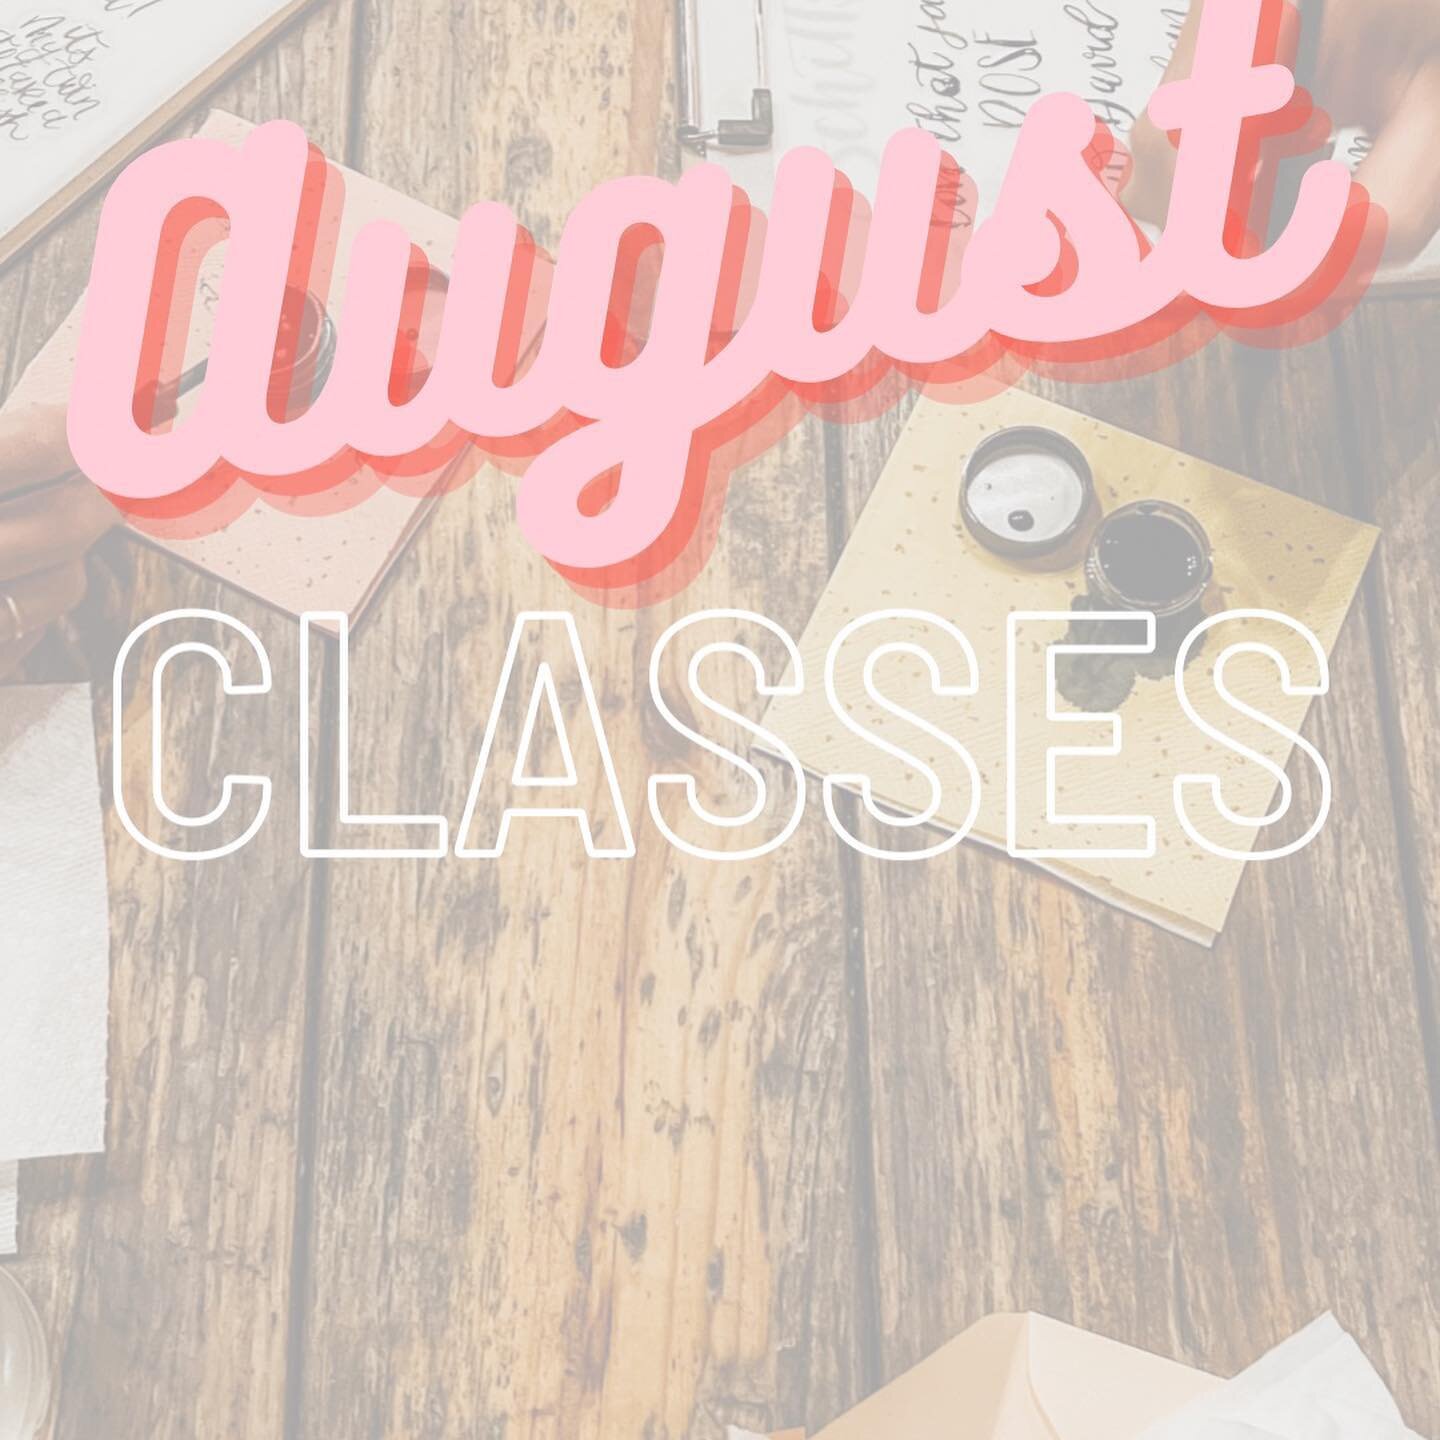 Guys, I love teaching calligraphy, like love it! It&rsquo;s fun to meet people excited to learn something new, and have a good time literally just hanging out making art! 
Some space still left in august classes!!!

Tuesday August 16- 
7-8:30pm @314b